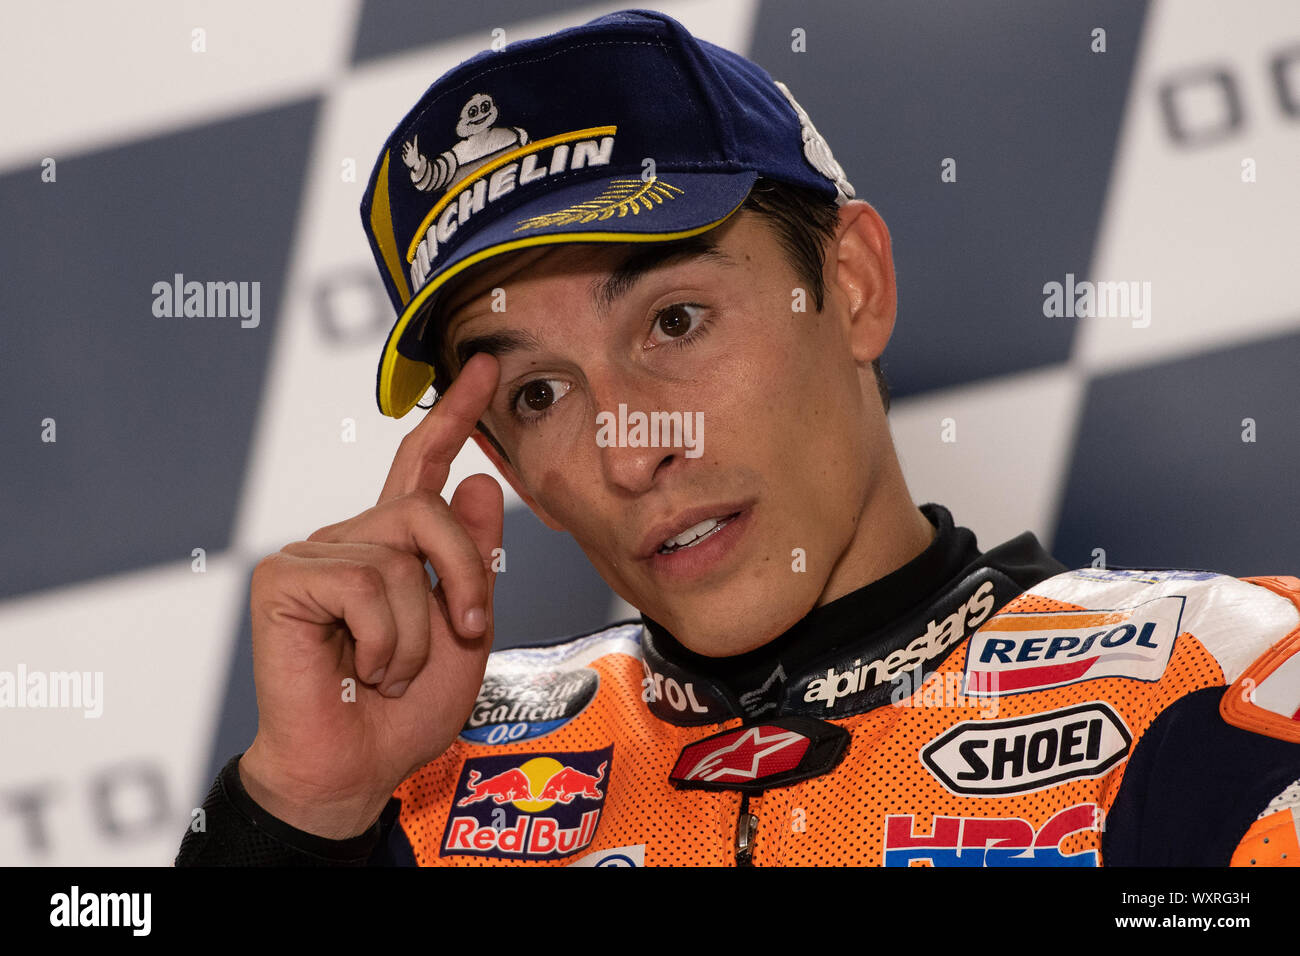 MARC MARQUEZ, SPANISH RIDER AND MOTOGP WORLD CHAMPION WITH NUMBER 93 FOR REPSOL HONDA TEAM  during Thursday And Sunday Press Conference Of The Motogp Stock Photo